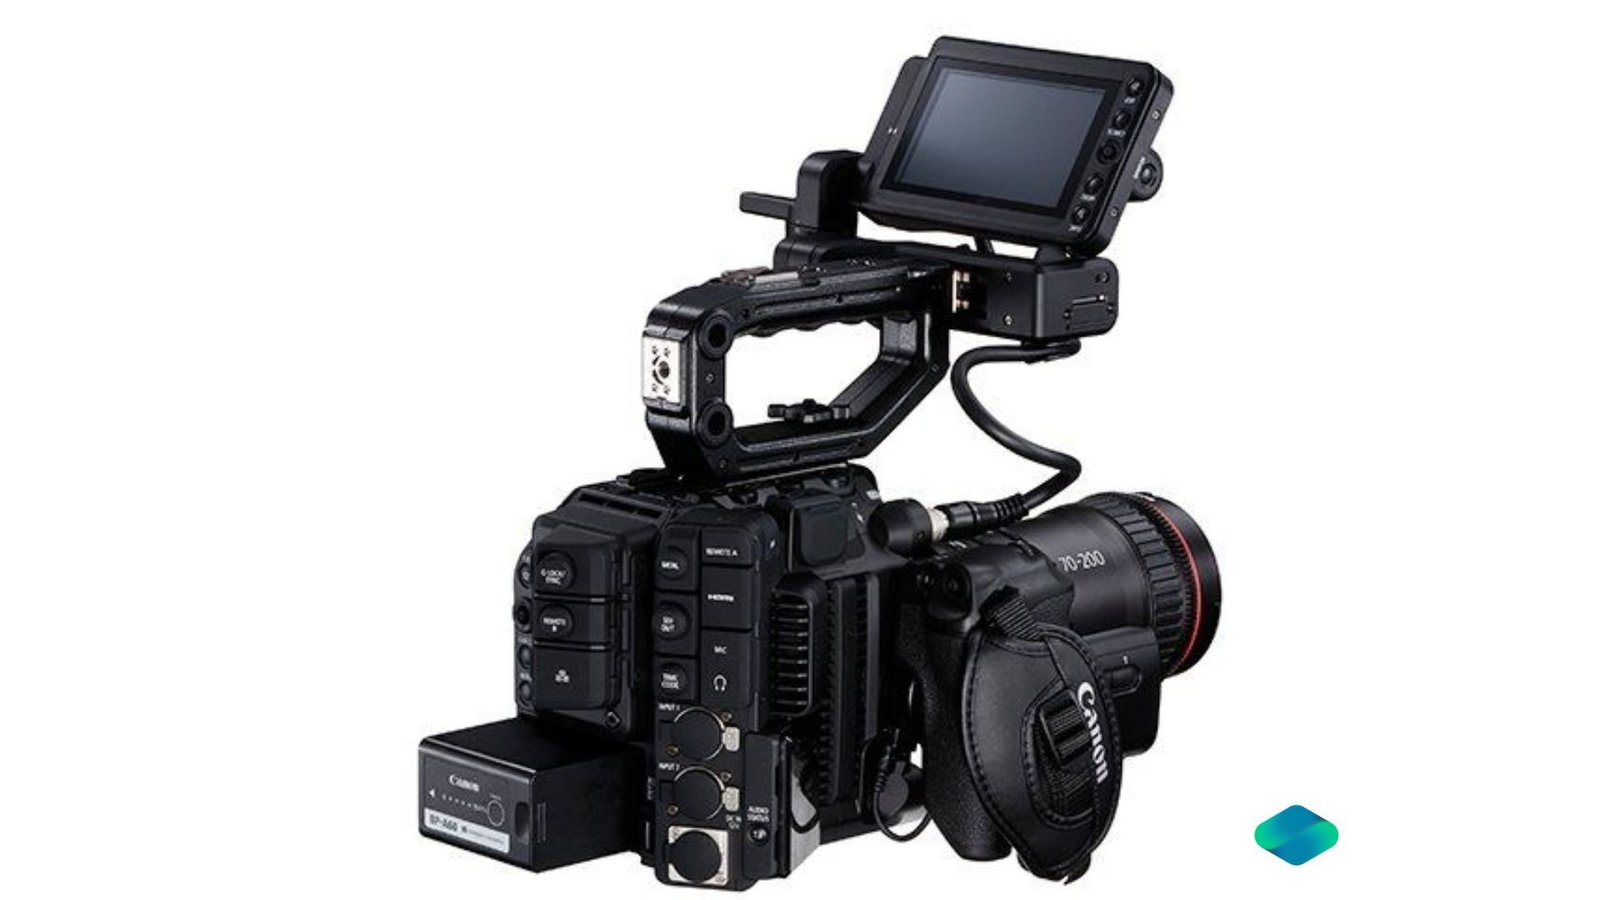 Rent Canon C-300 Mark III Camera with Canon Lens Kit in Delhi NCR, Rent Canon EOS R-5 Mirror Less 8K Camera with Cp.2 Lens Kit in Delhi NCR, Camera accessories, Camera lenses for rent, in Delhi Gurgaon Noida, hire Shooting equipment, Lighting equipment rental, Film gear rental for Video production, camera rental company in Delhi, film equipment rental company